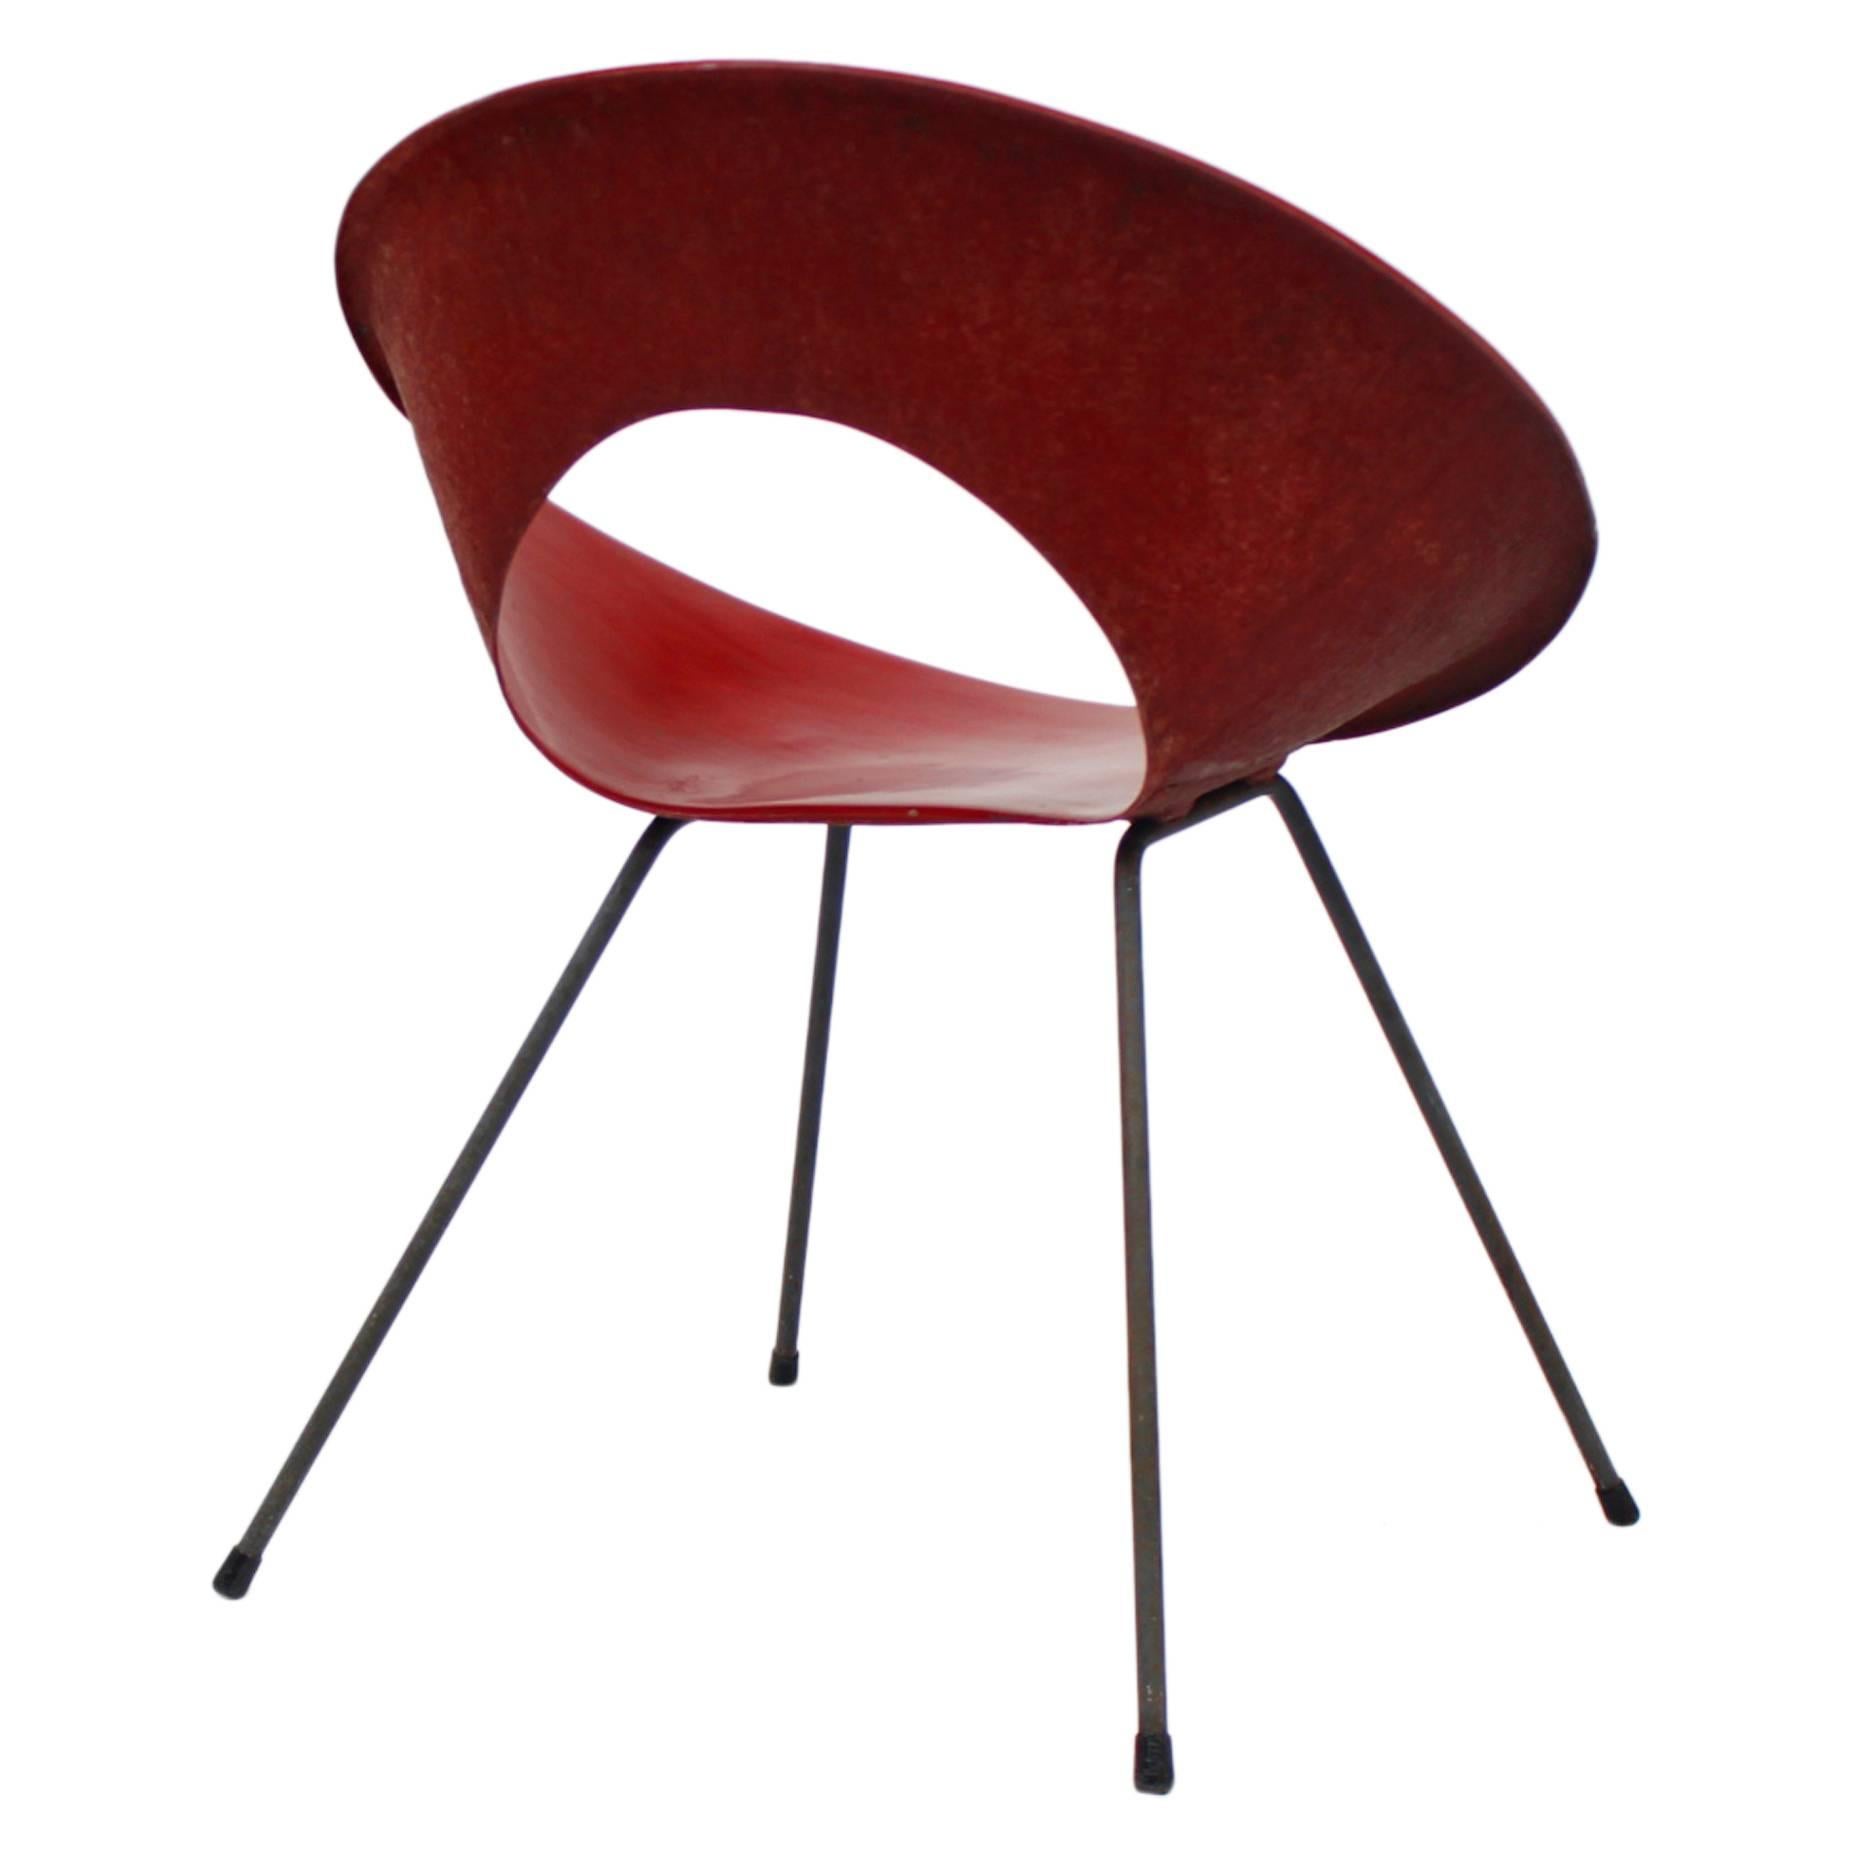 Style of Donald Knorr Chair, For Sale